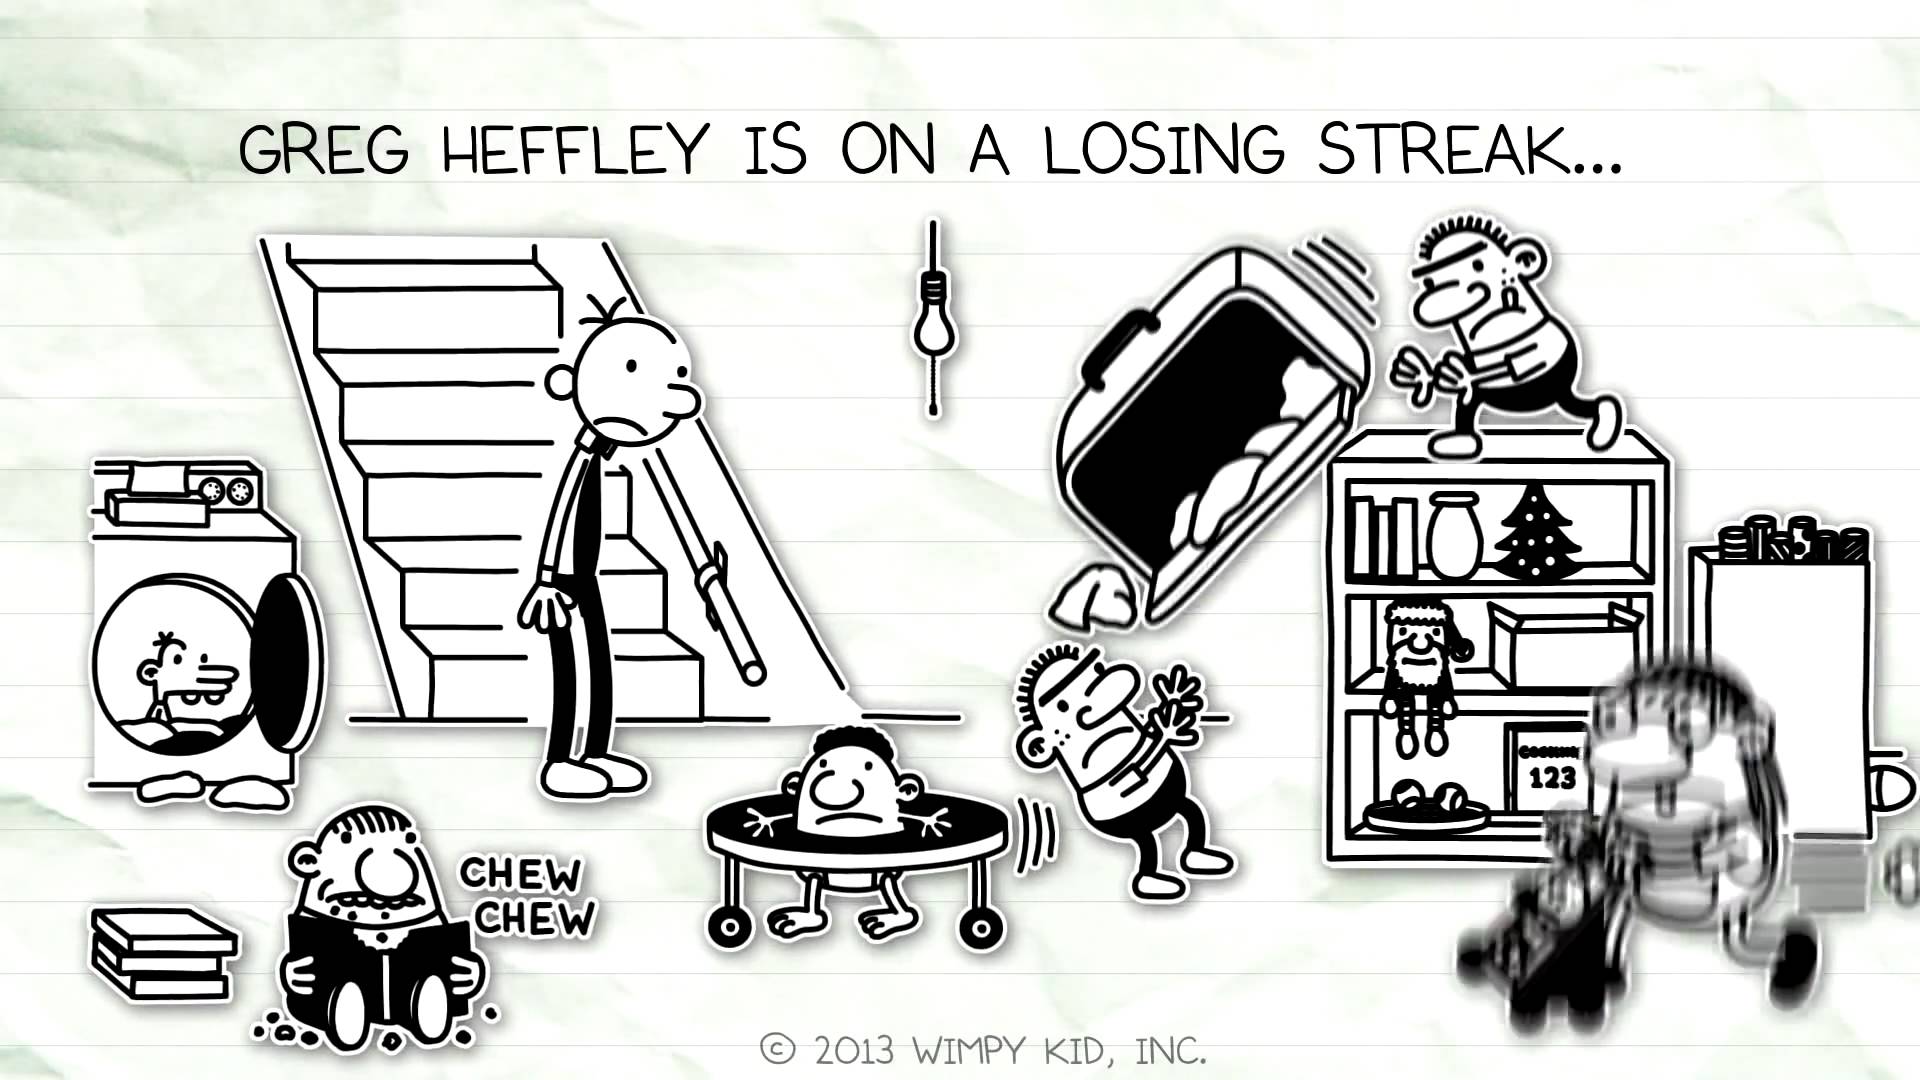 Diary of a Wimpy Kid Hard Luck Trailer